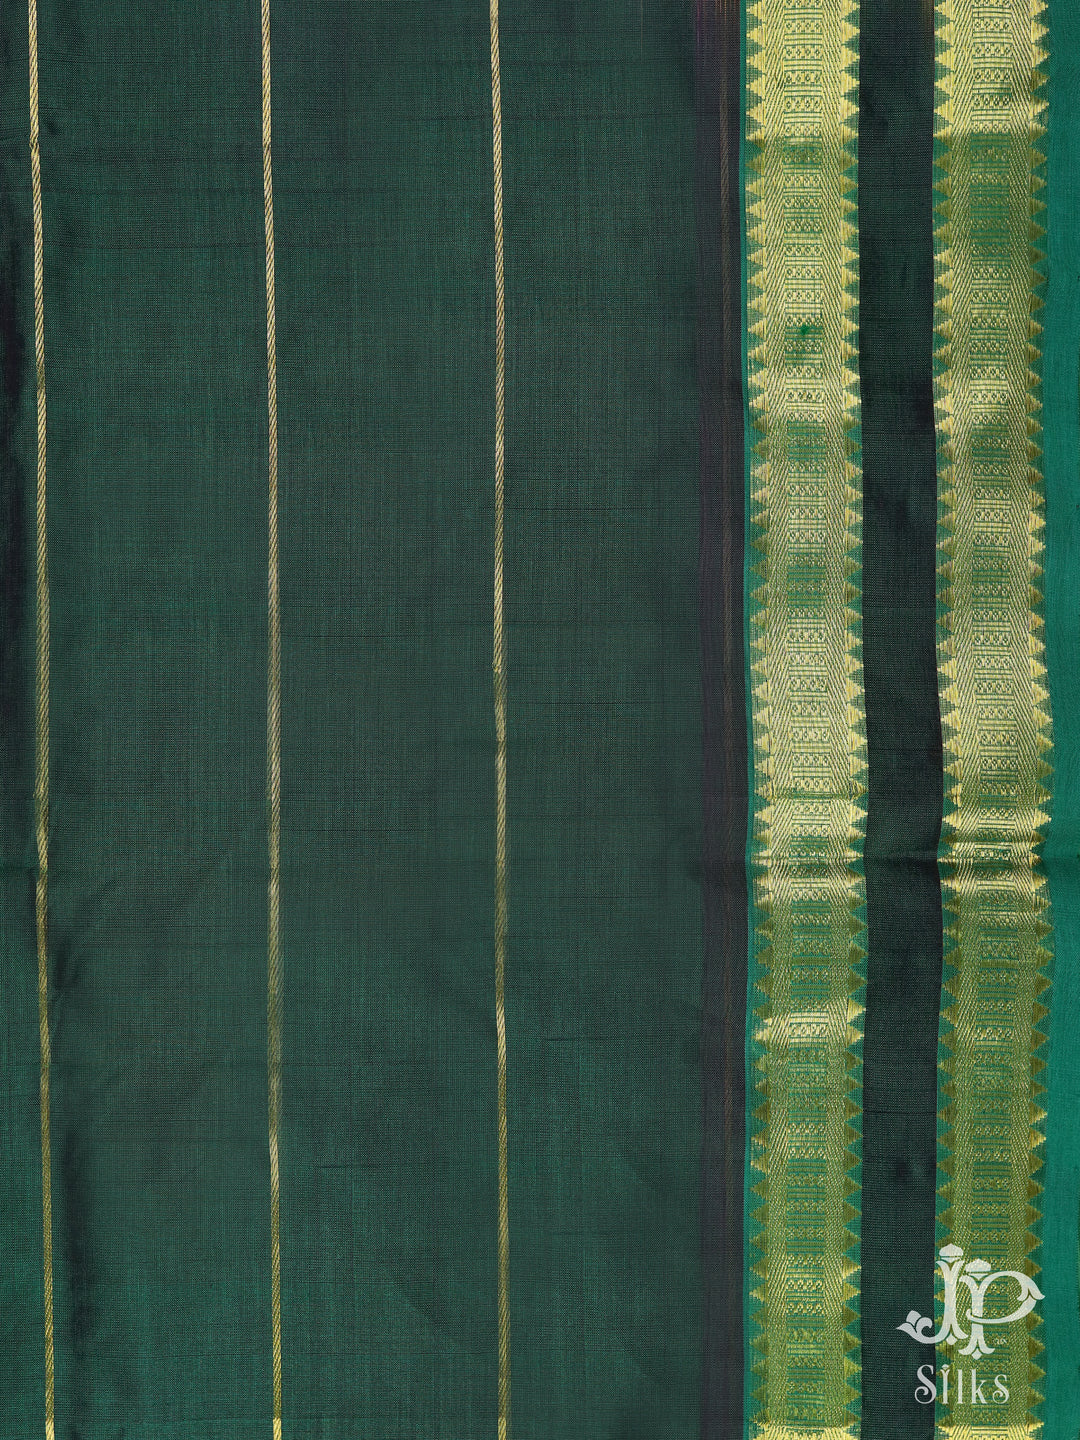 Lime Green and Bottle Green Silk Cotton Saree - E1604 - VIew 2